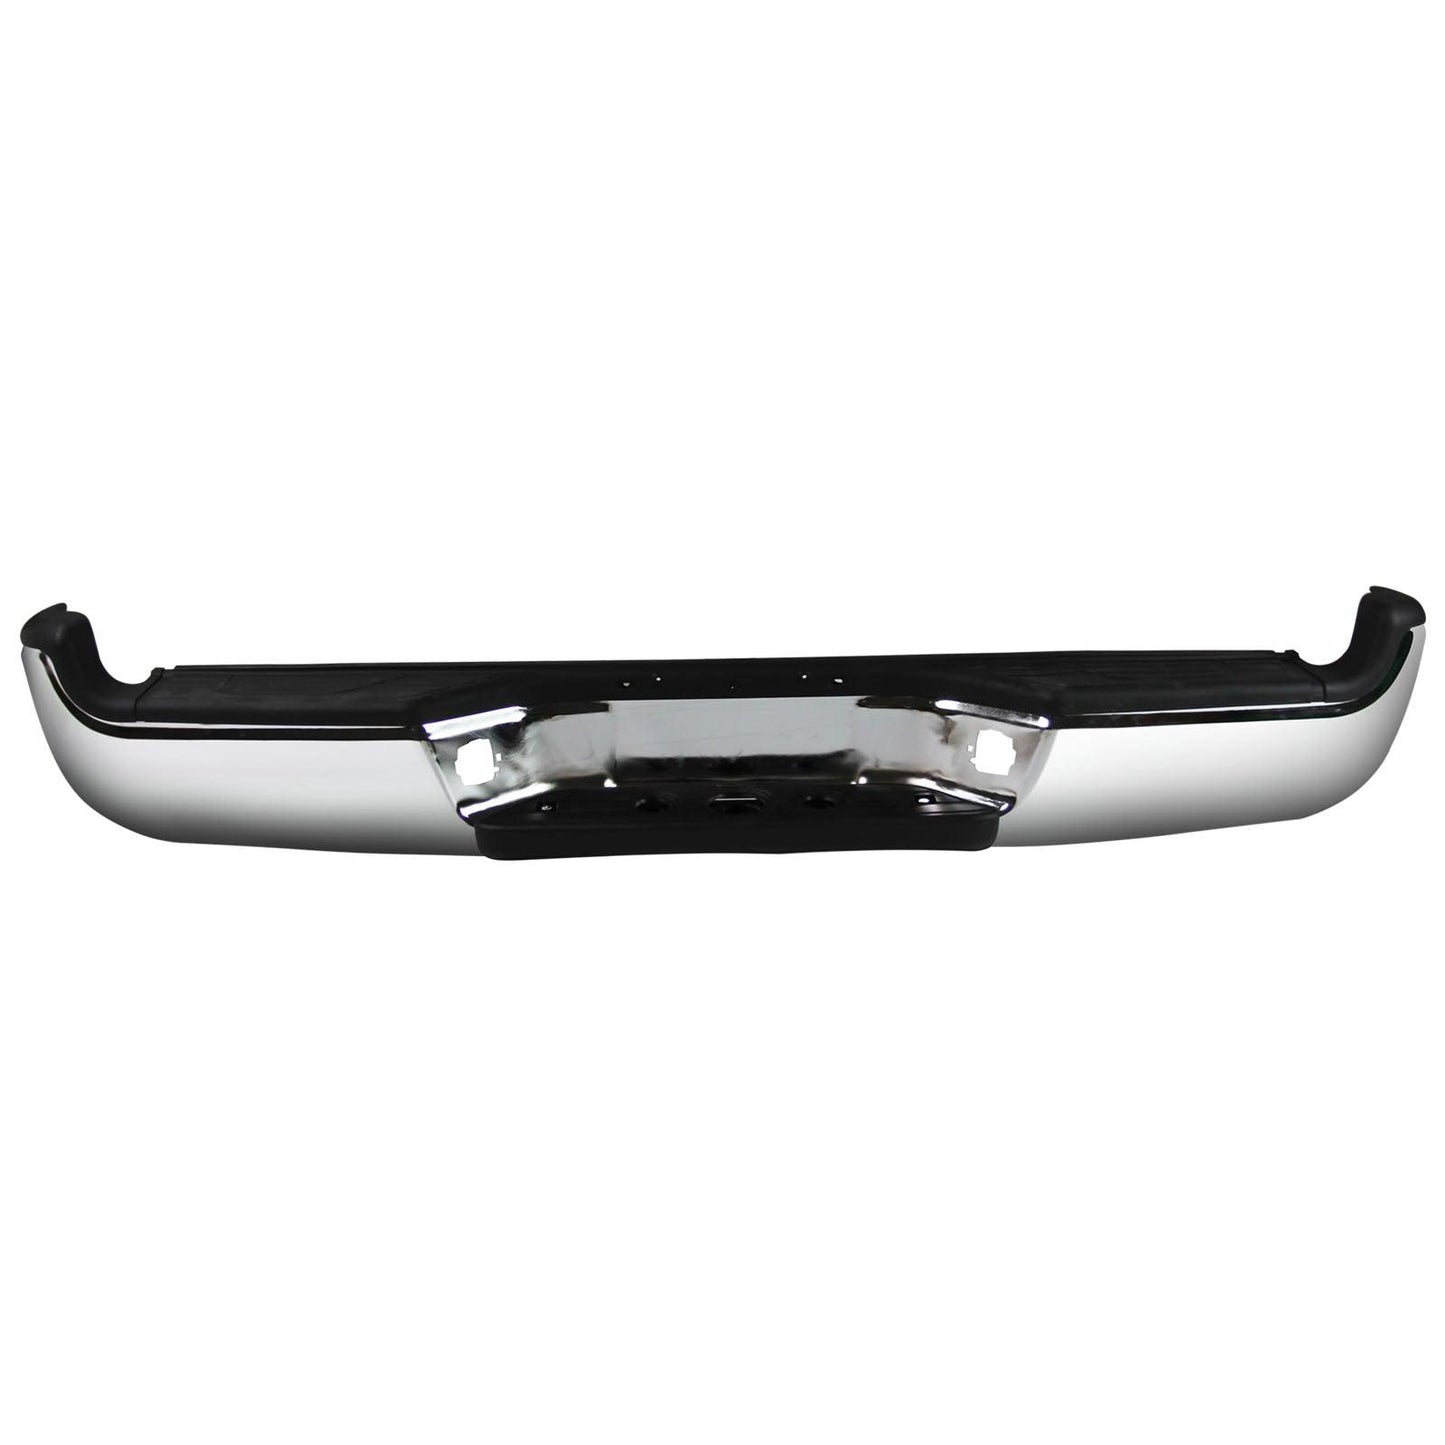 NEW Steel - Complete Chrome Rear Bumper Assembly For 2005-2015 Tacoma 05-15 SR5 (Fits: Tacoma) - Goodmatchup